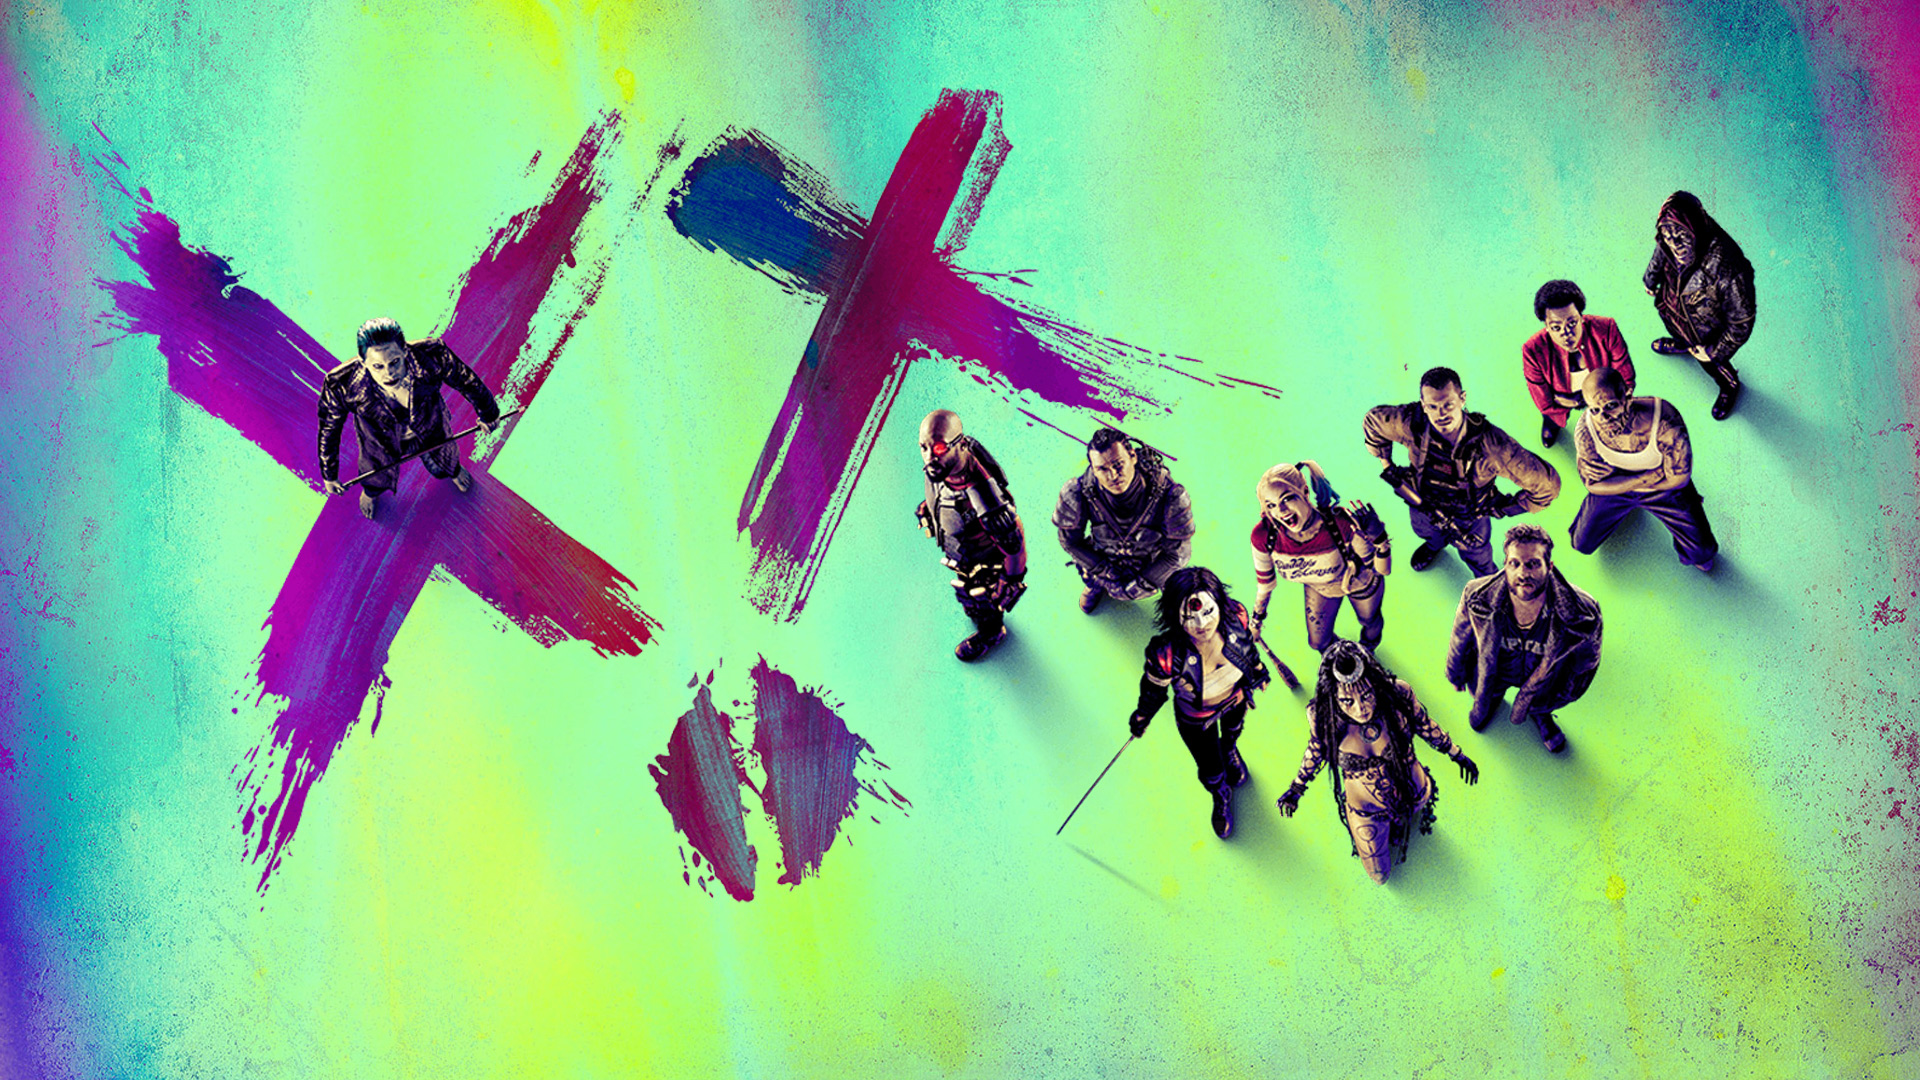 Movie Suicide Squad HD Wallpaper | Background Image